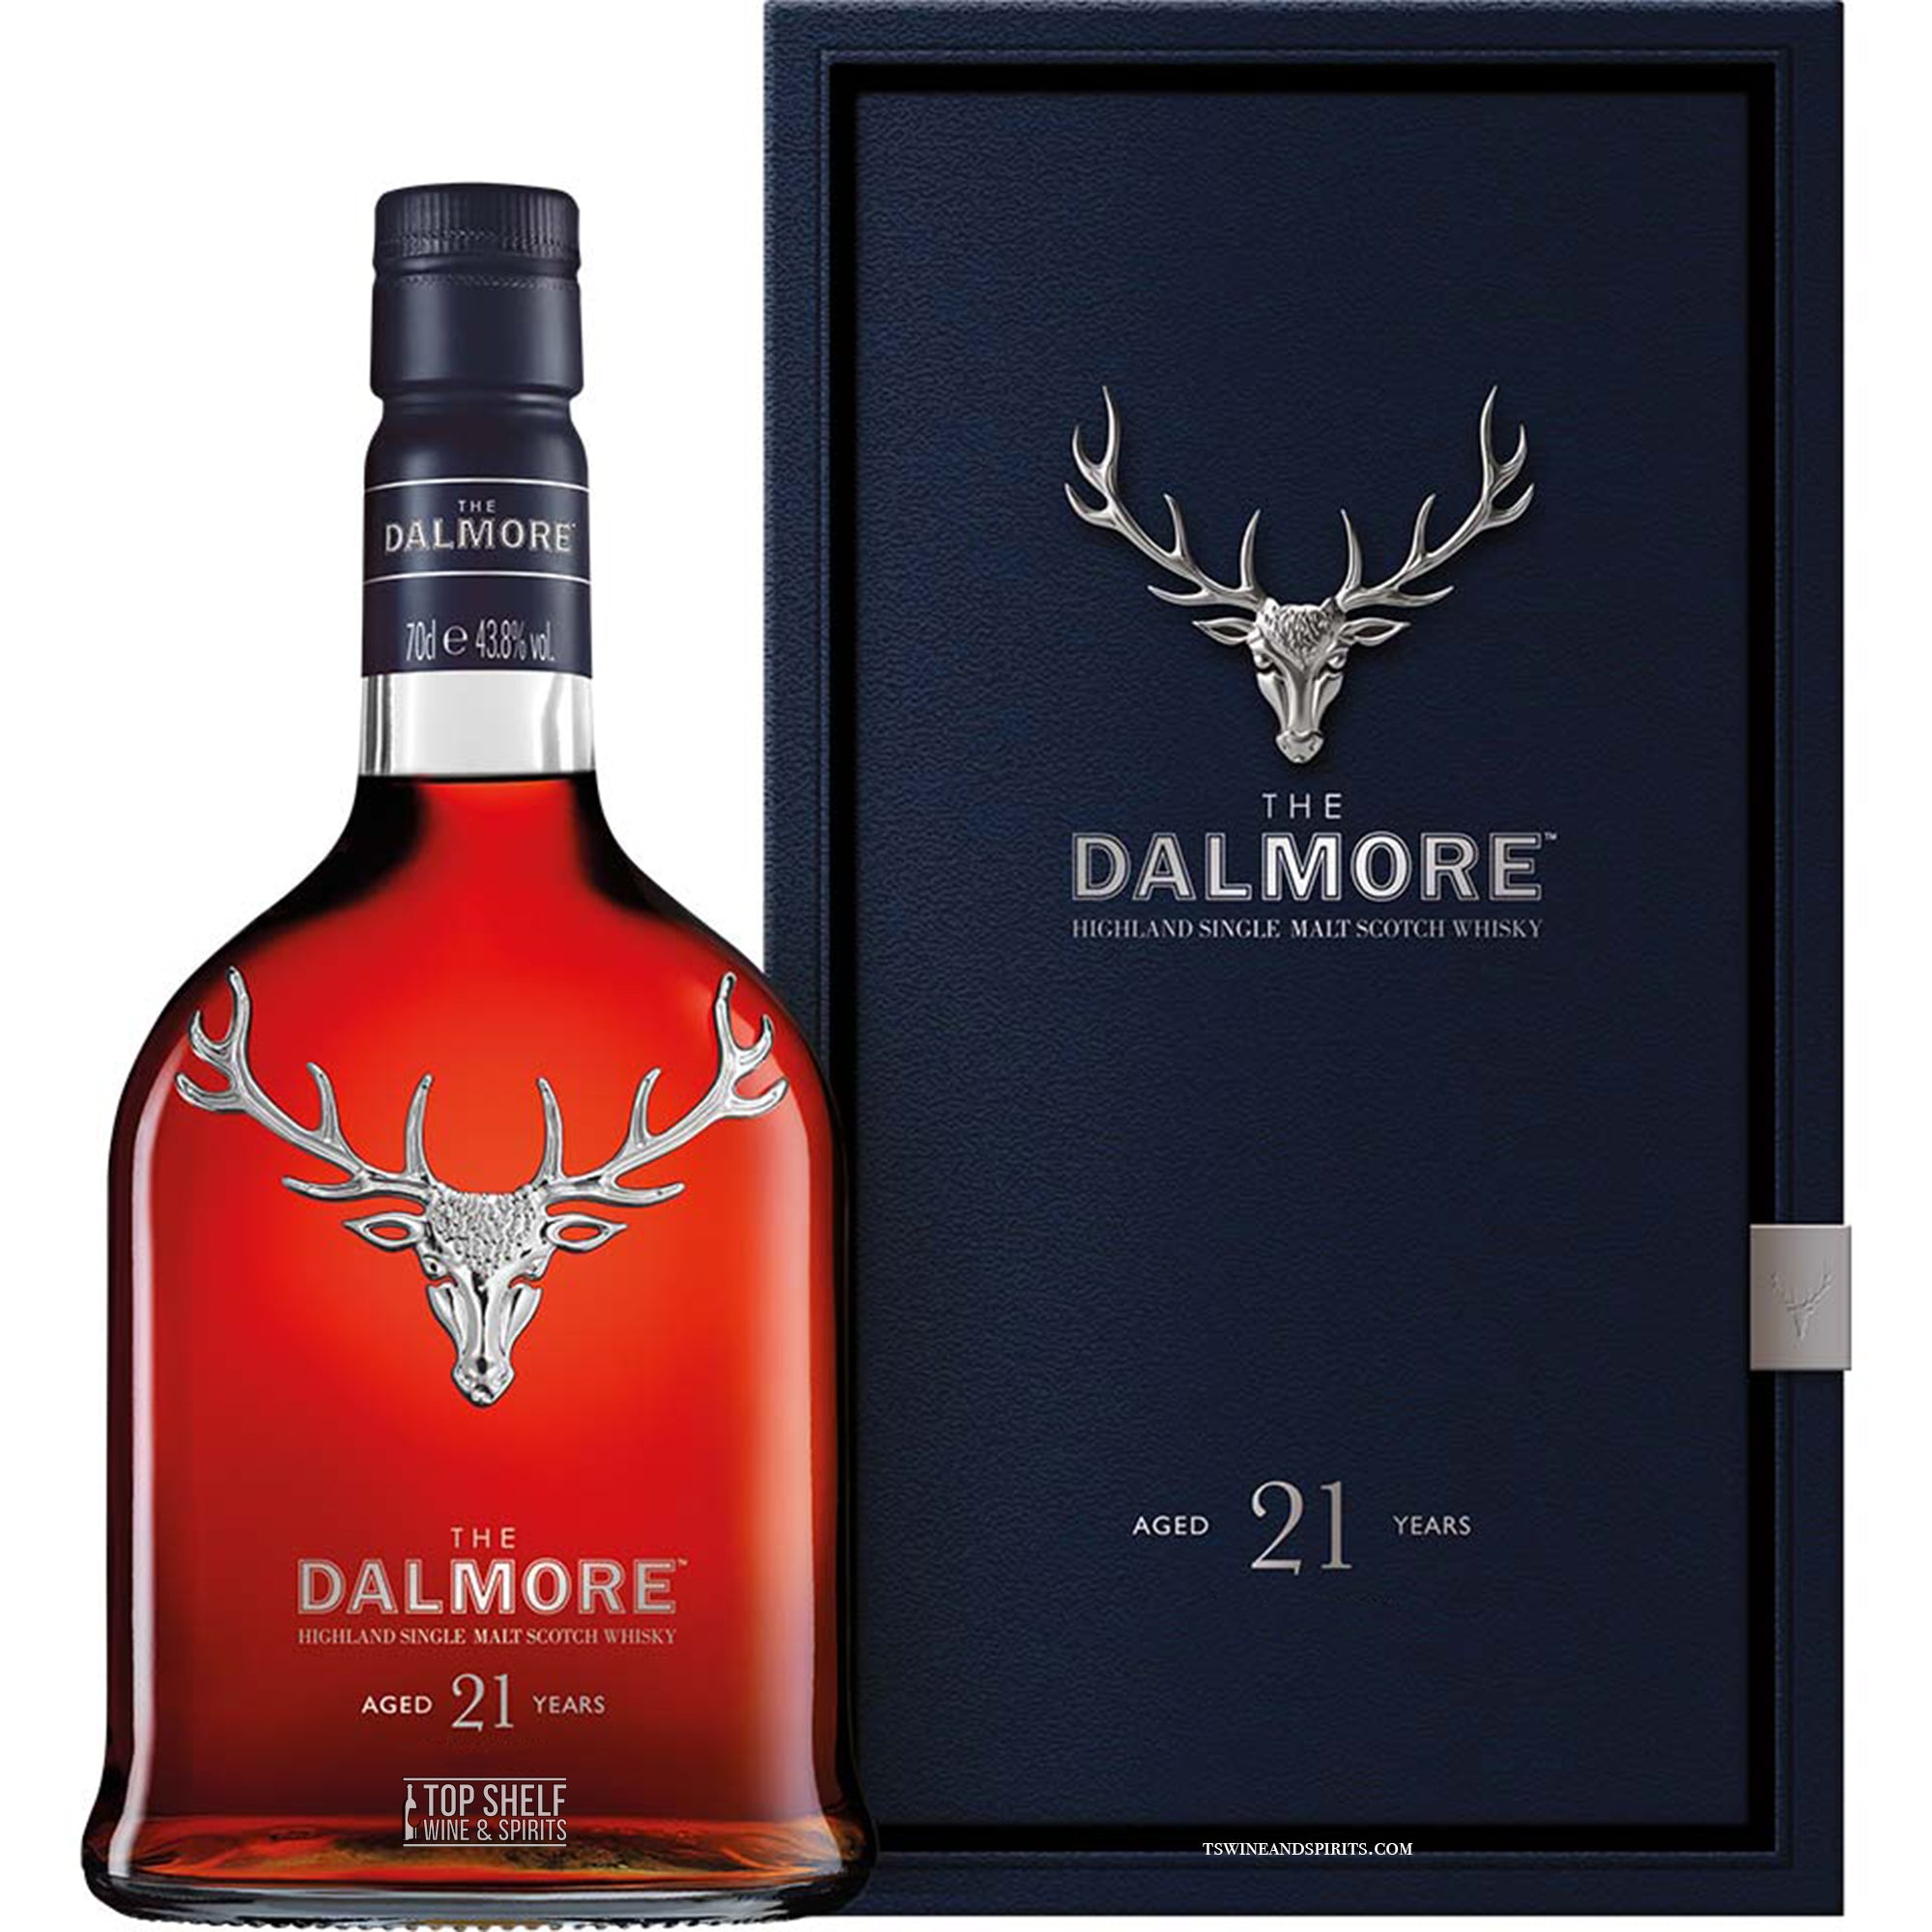 Dalmore 21 Year Old Scotch Whisky